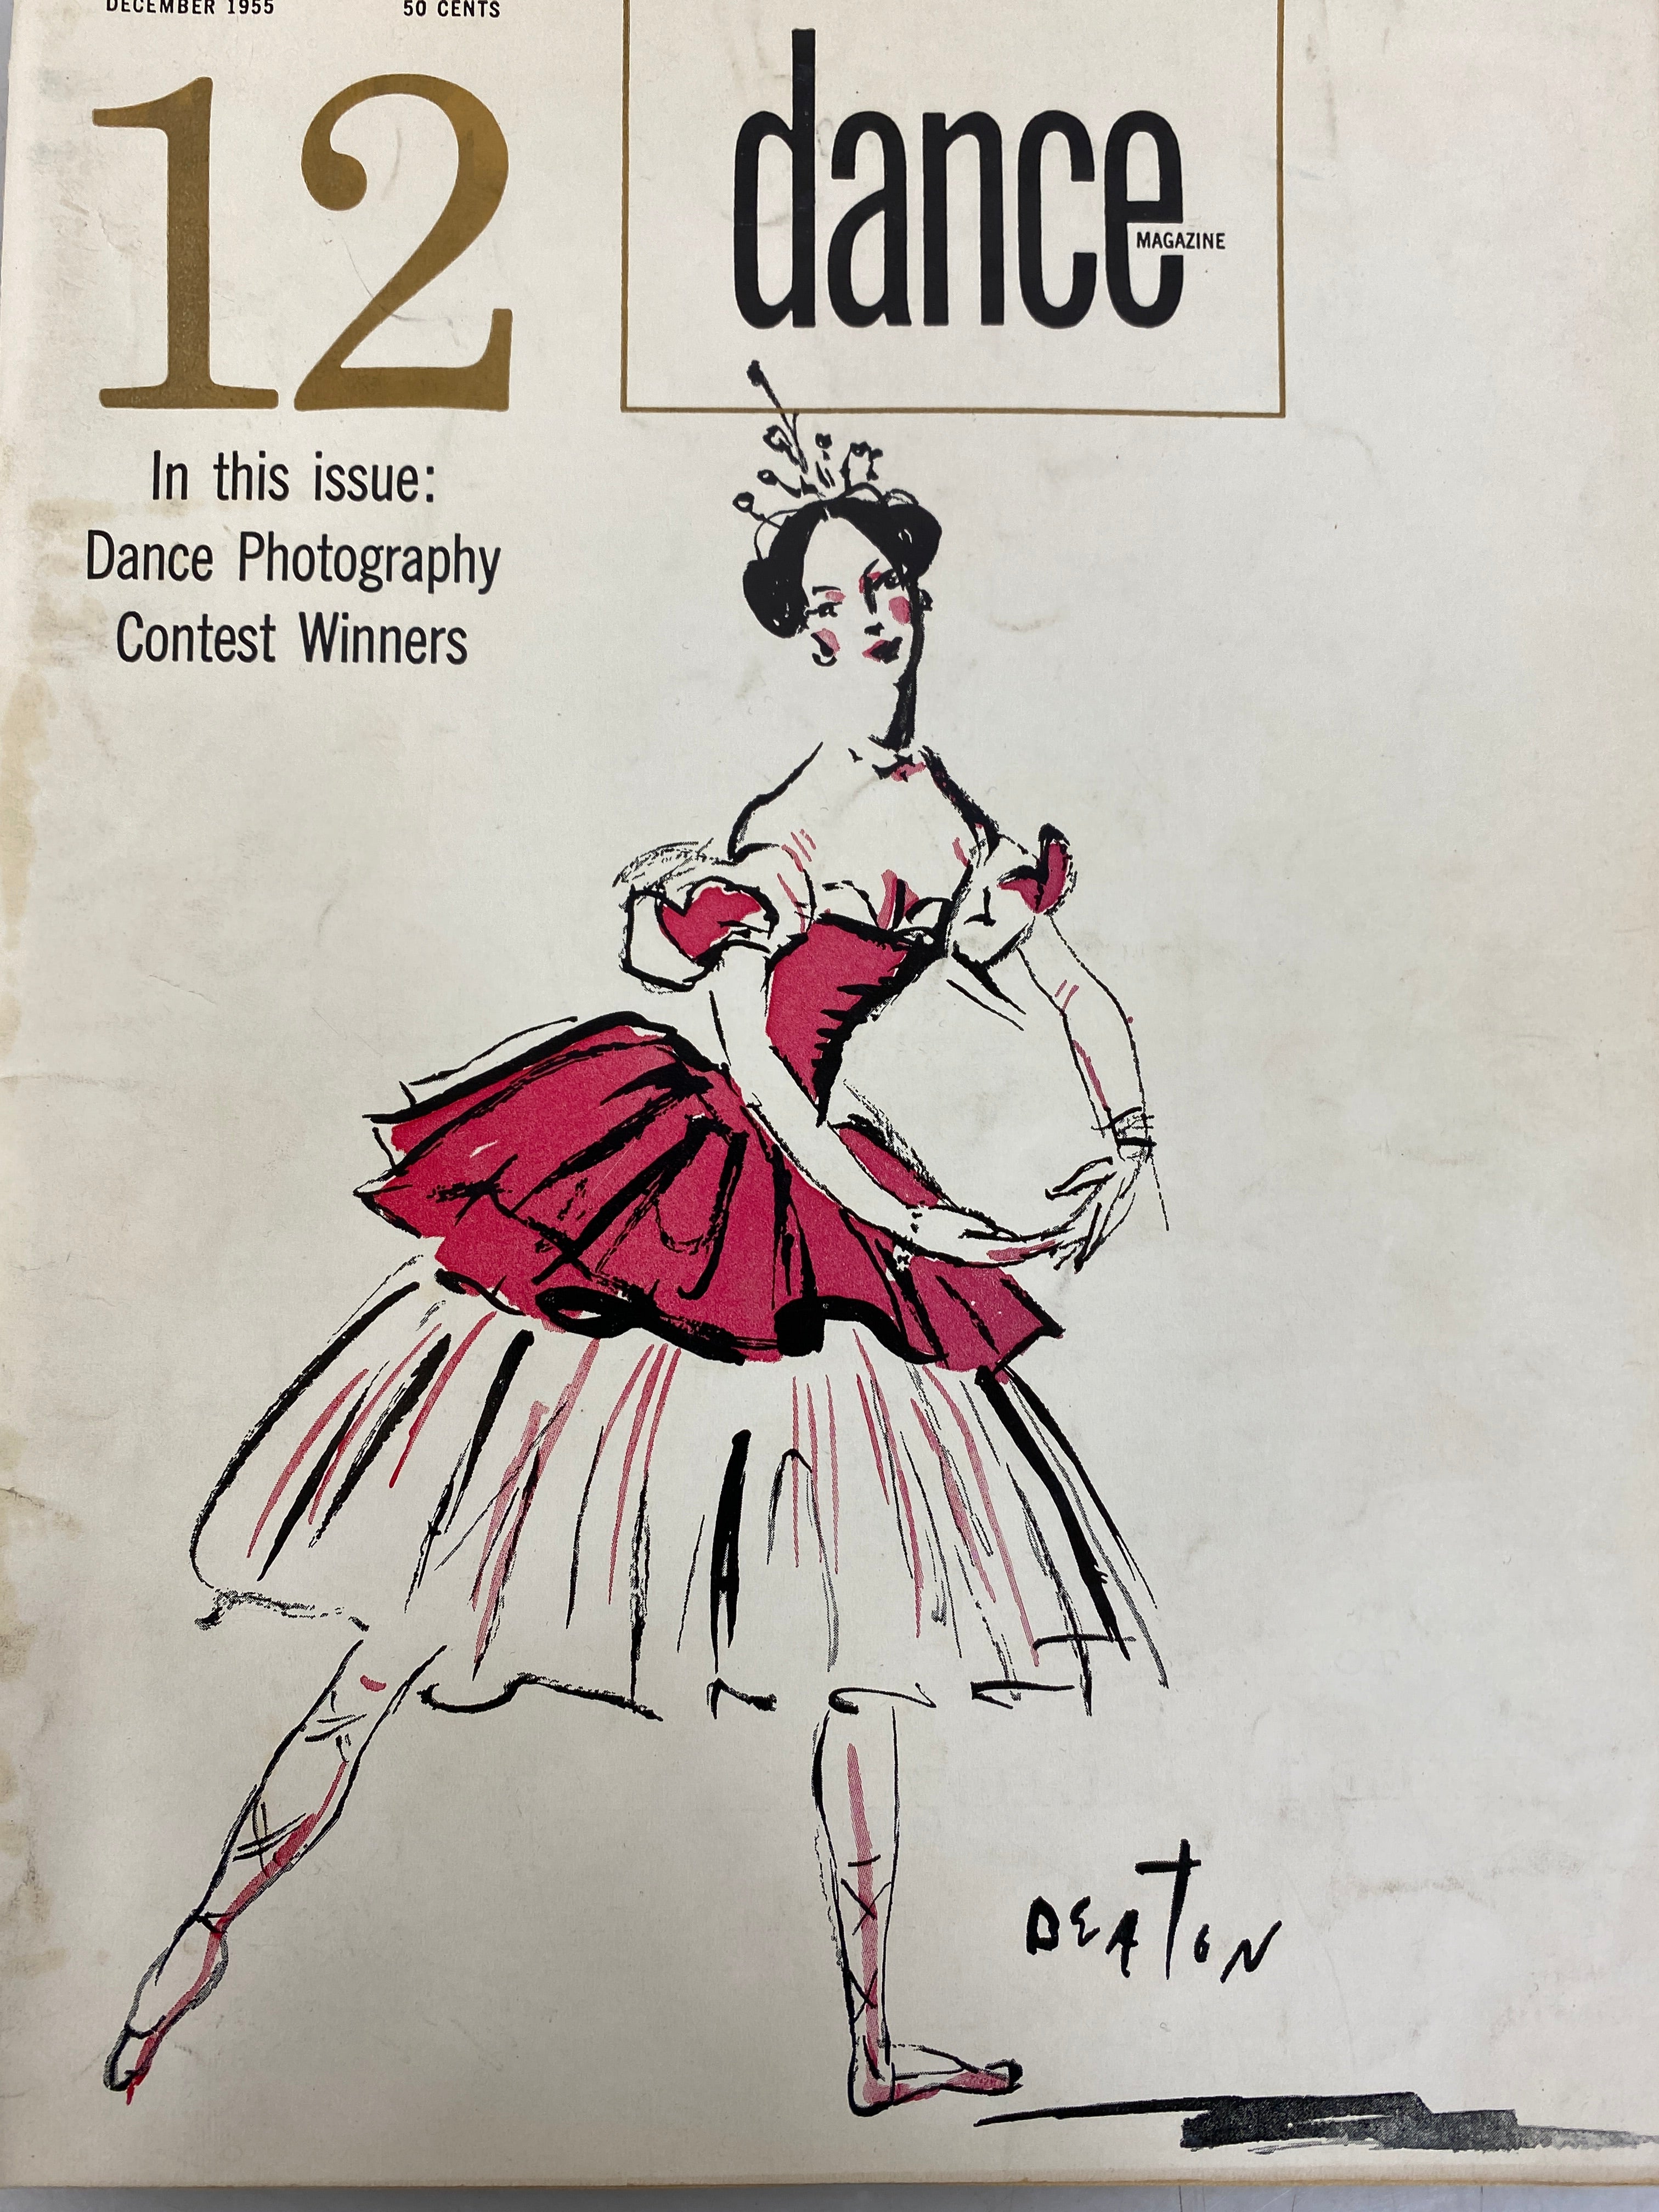 Lot of 9 Vintage The American Dancer Magazines Rare 1955 Issues